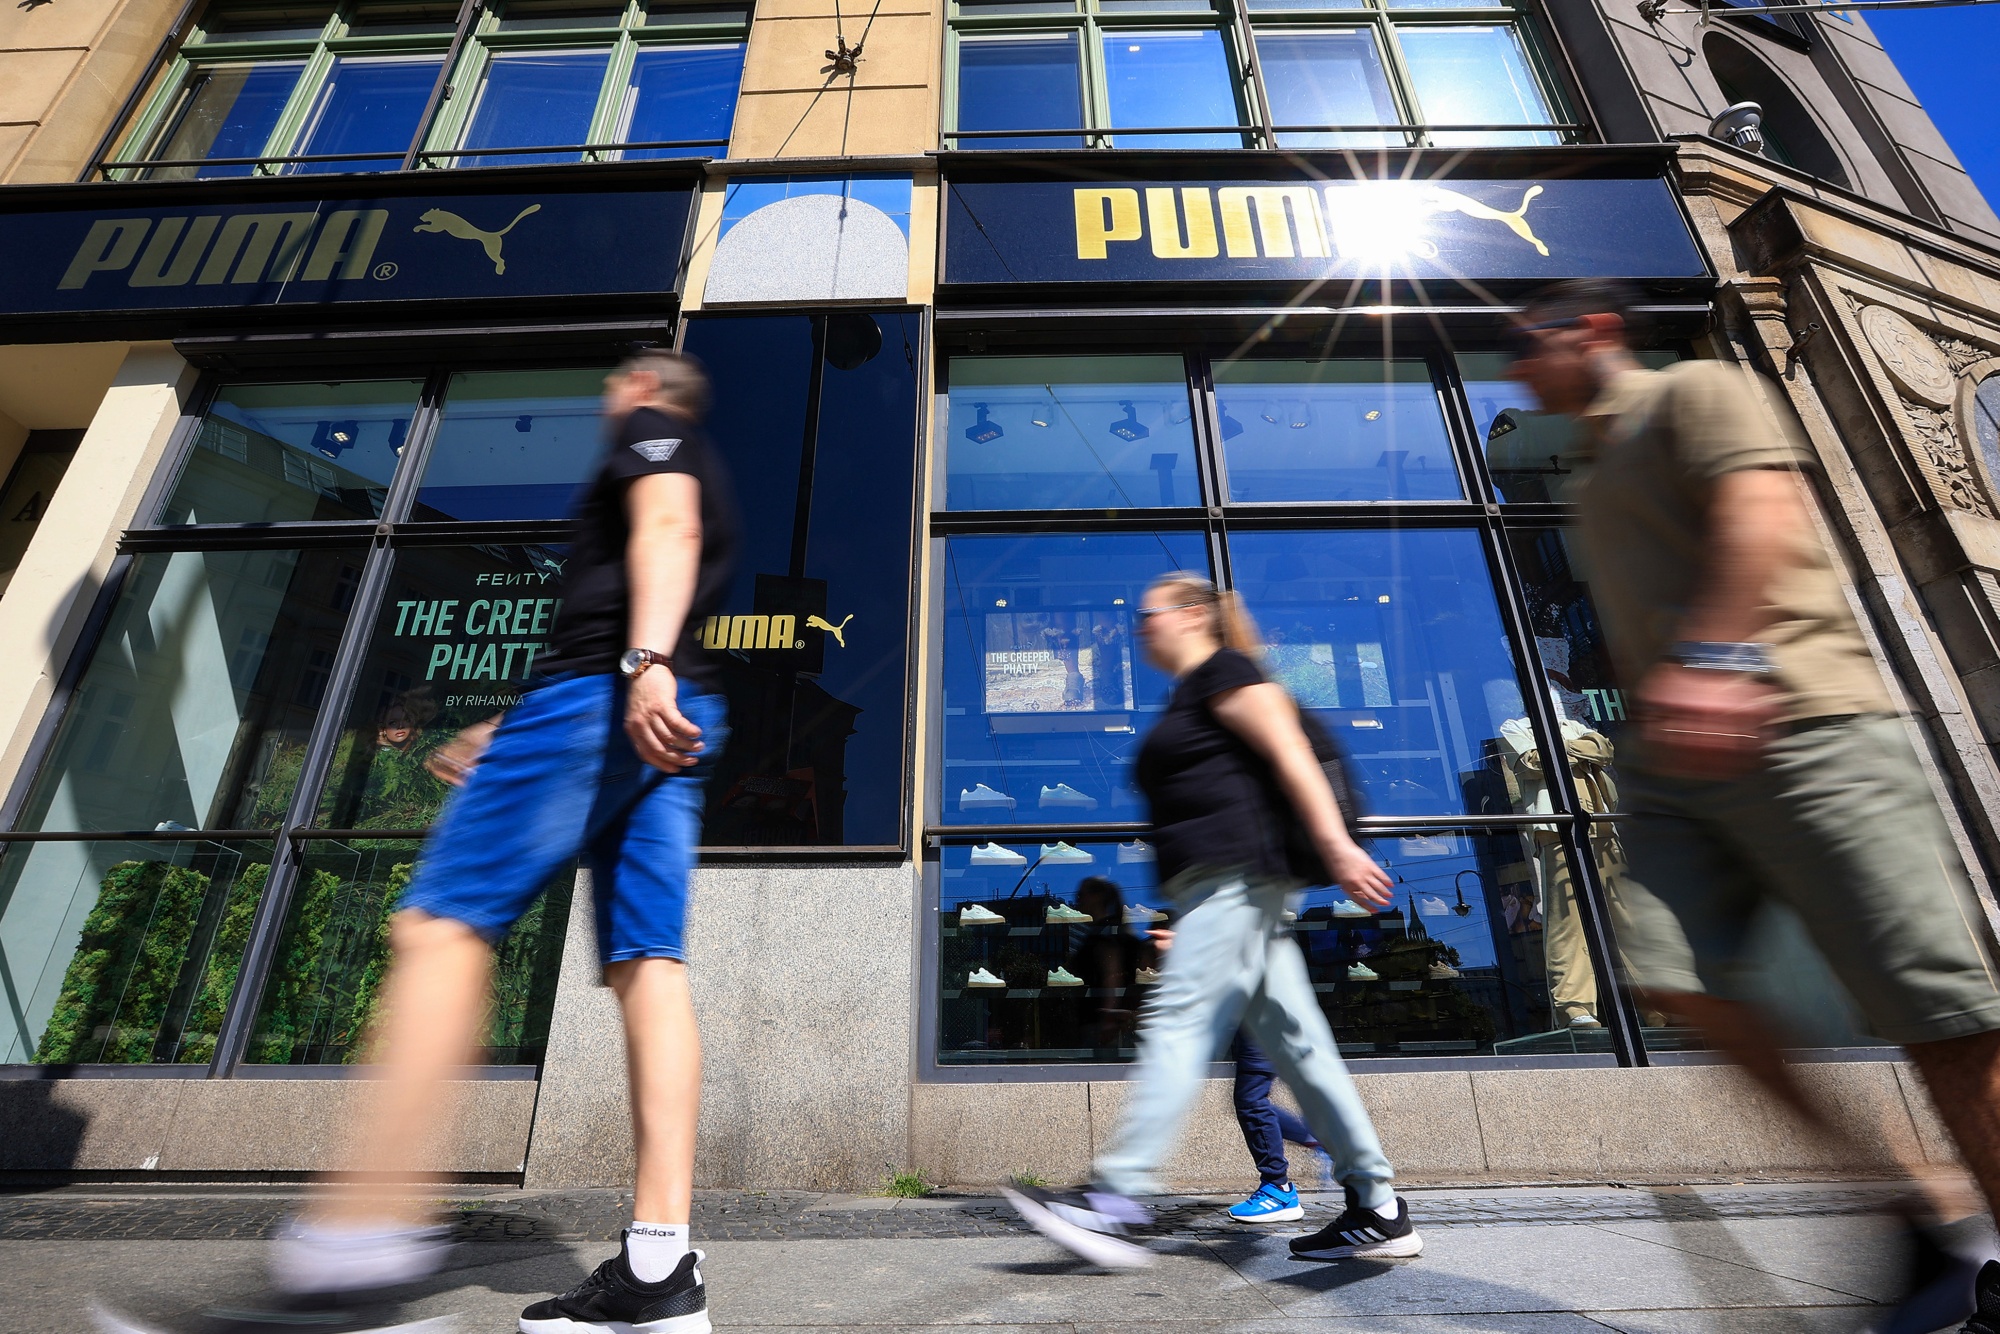 The Puma flagship store in Berlin.